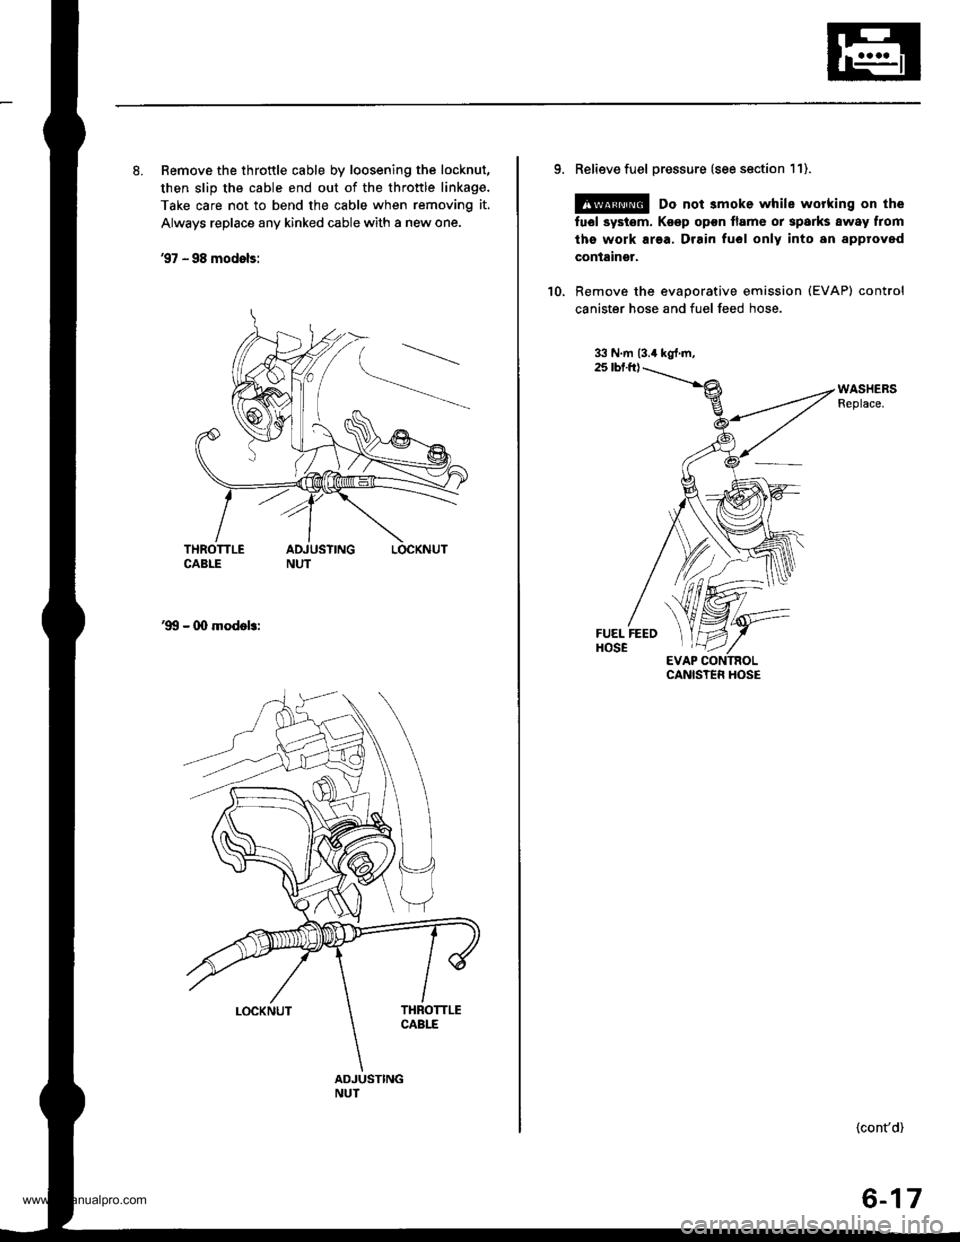 HONDA CR-V 1997 RD1-RD3 / 1.G Workshop Manual 
8. Remove the throttle cable by loosening the locknut,
then slip the cable end out of the throttle linkage.
Take care not to bend the cable when removing it.
Always replace any kinked cable with a ne